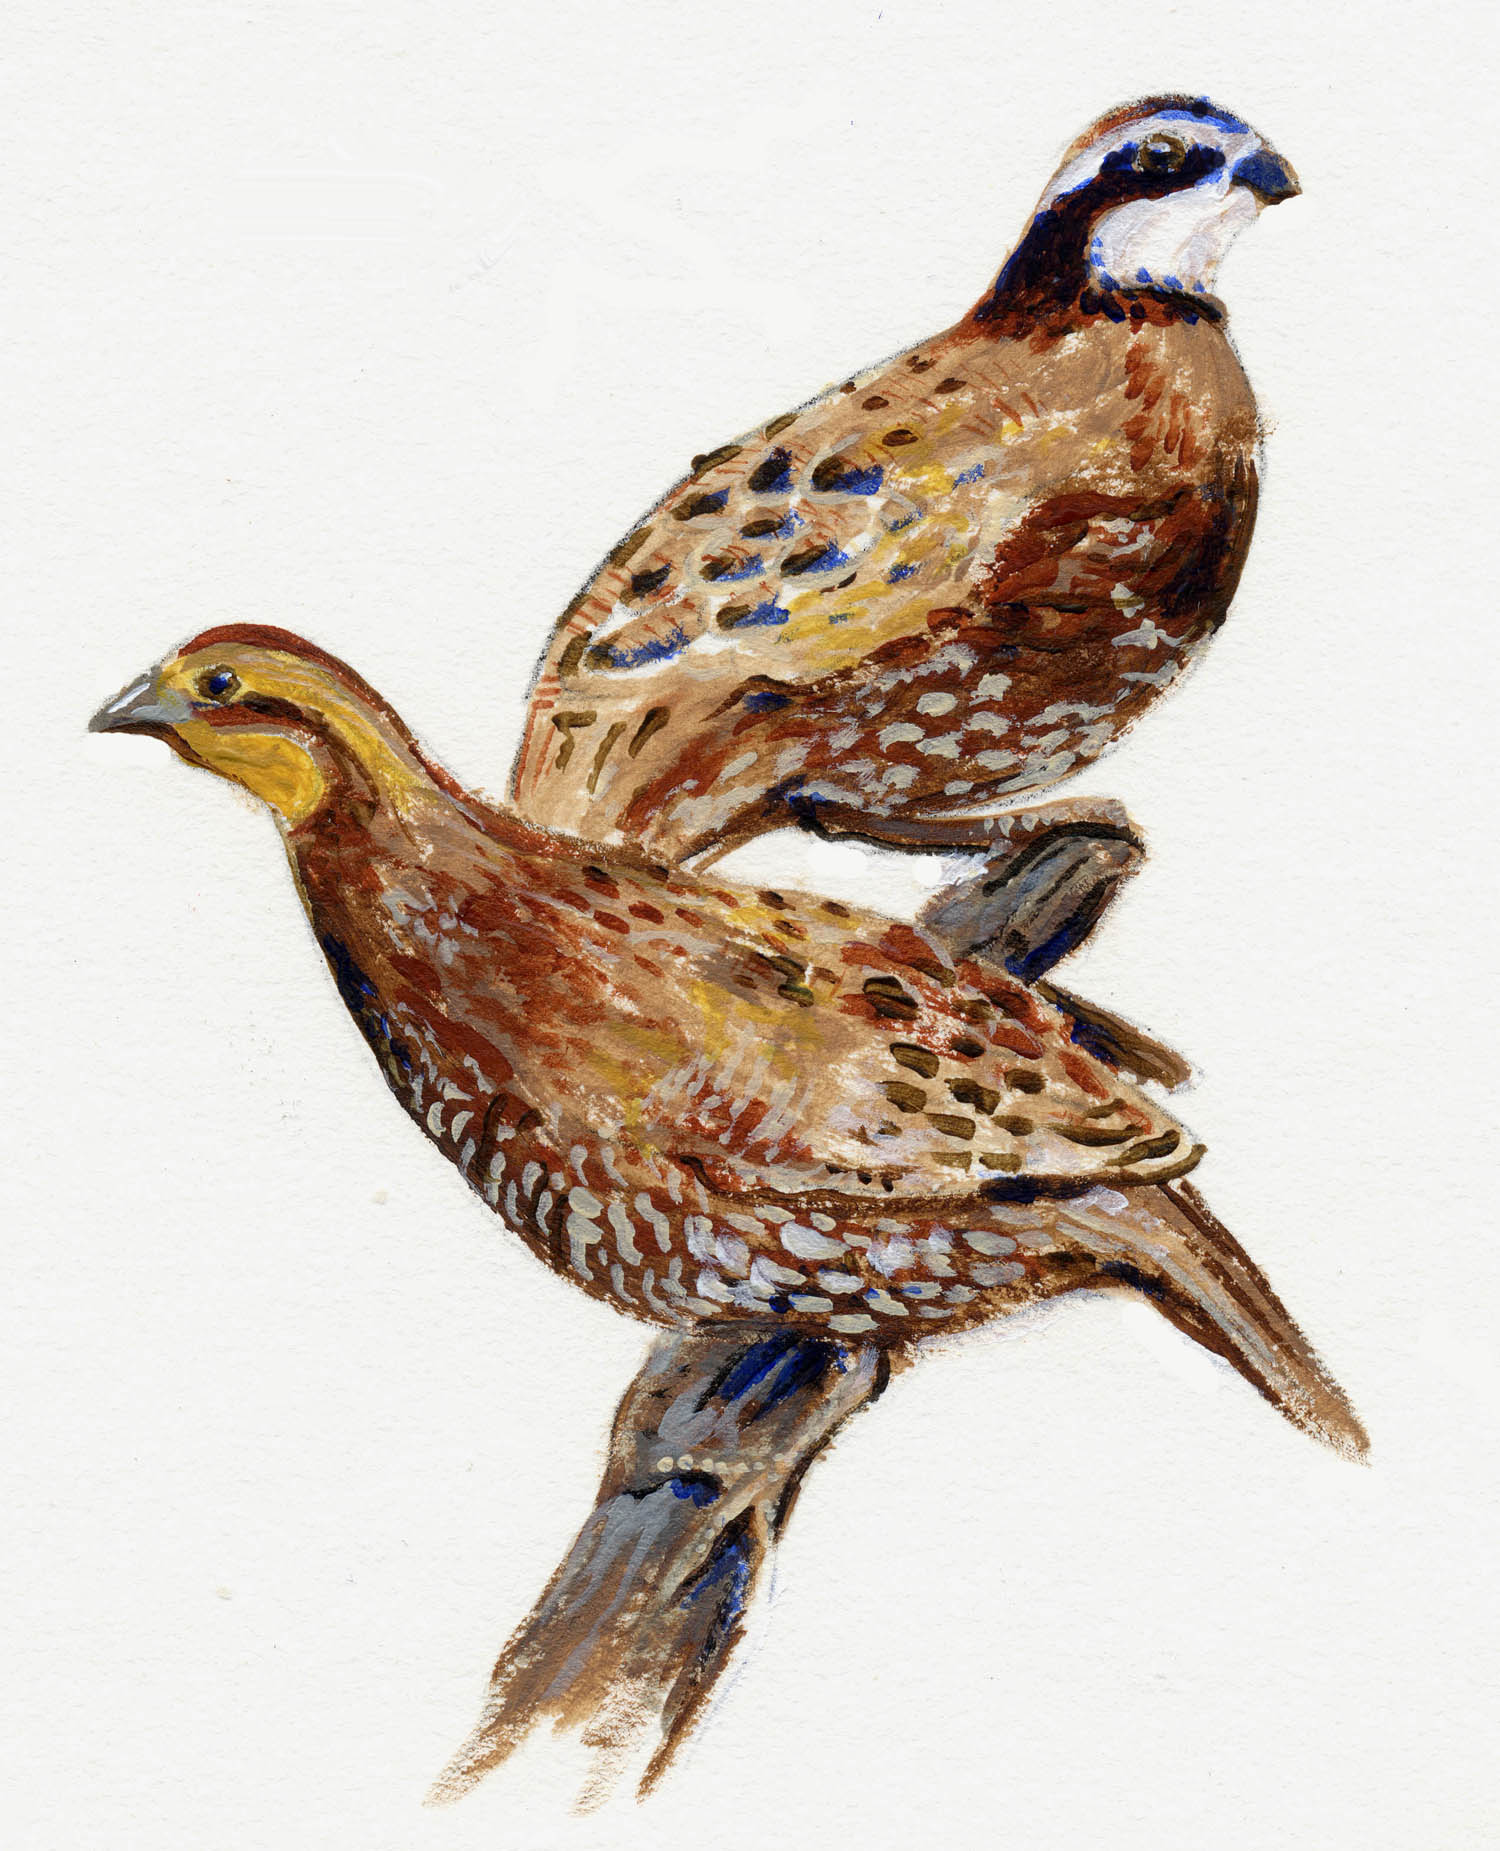 Quail illustration shows two painted birds